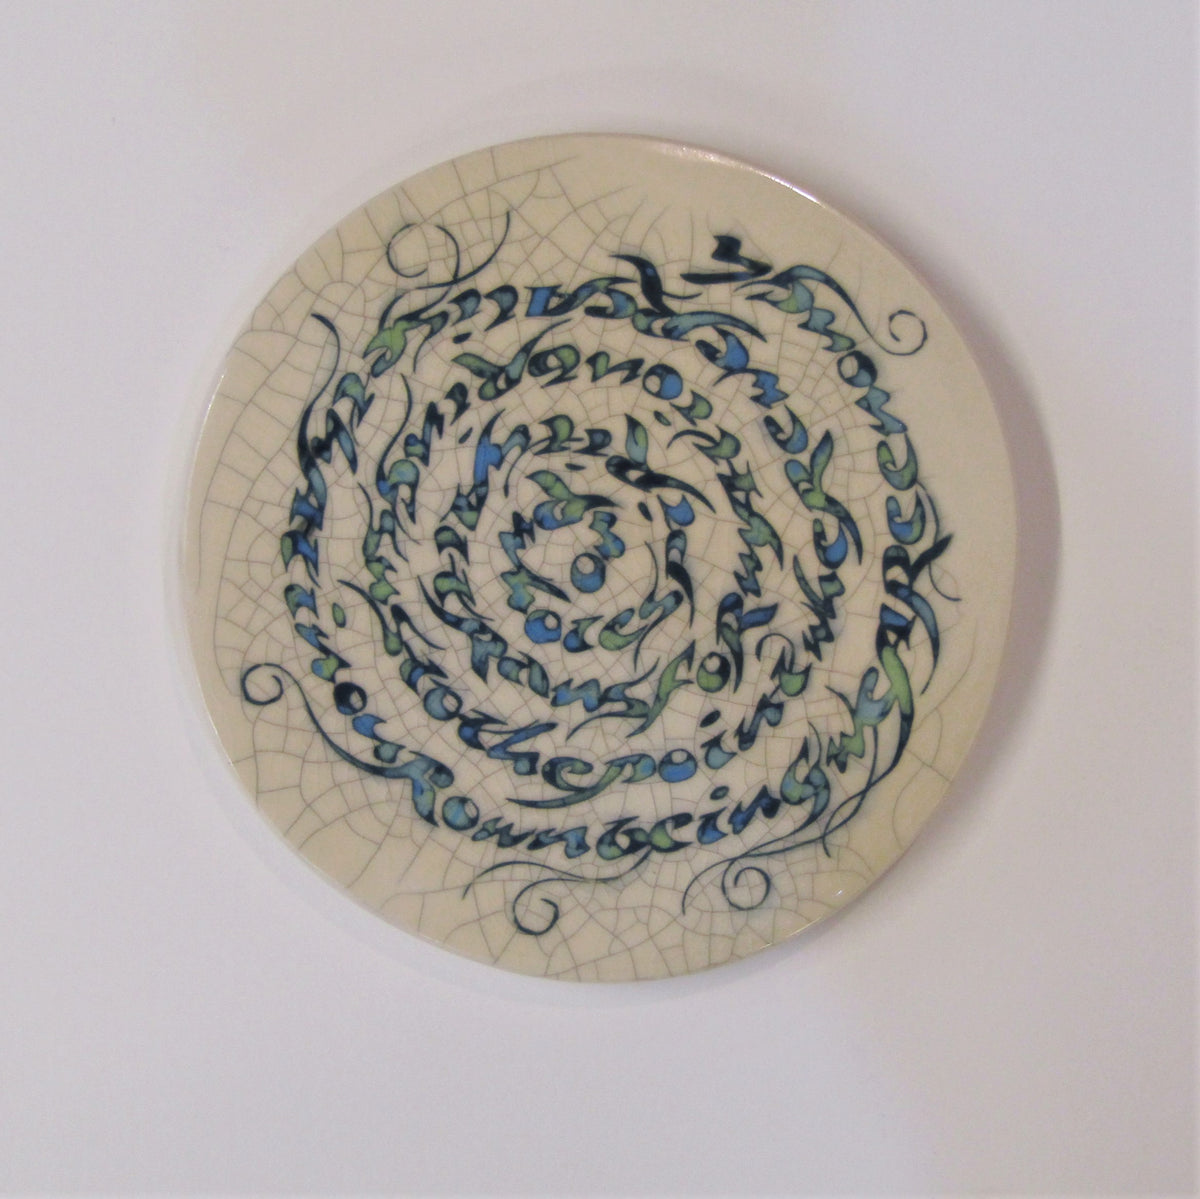 Spiritual Transformation Quote, Round Ceramic Tile, Trivet by Mel Chambers